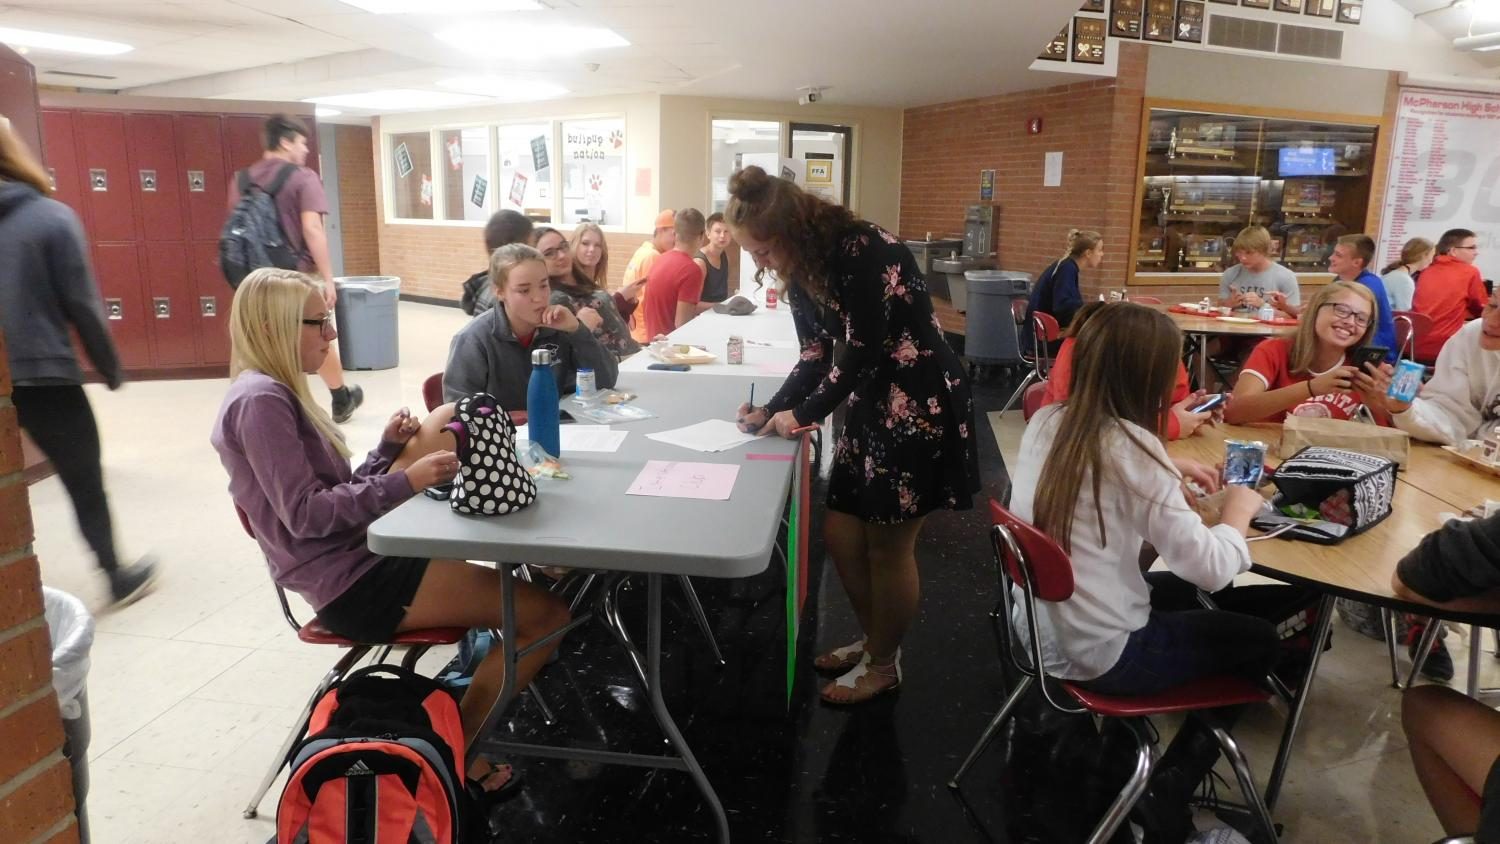 Students signing up for clubs 